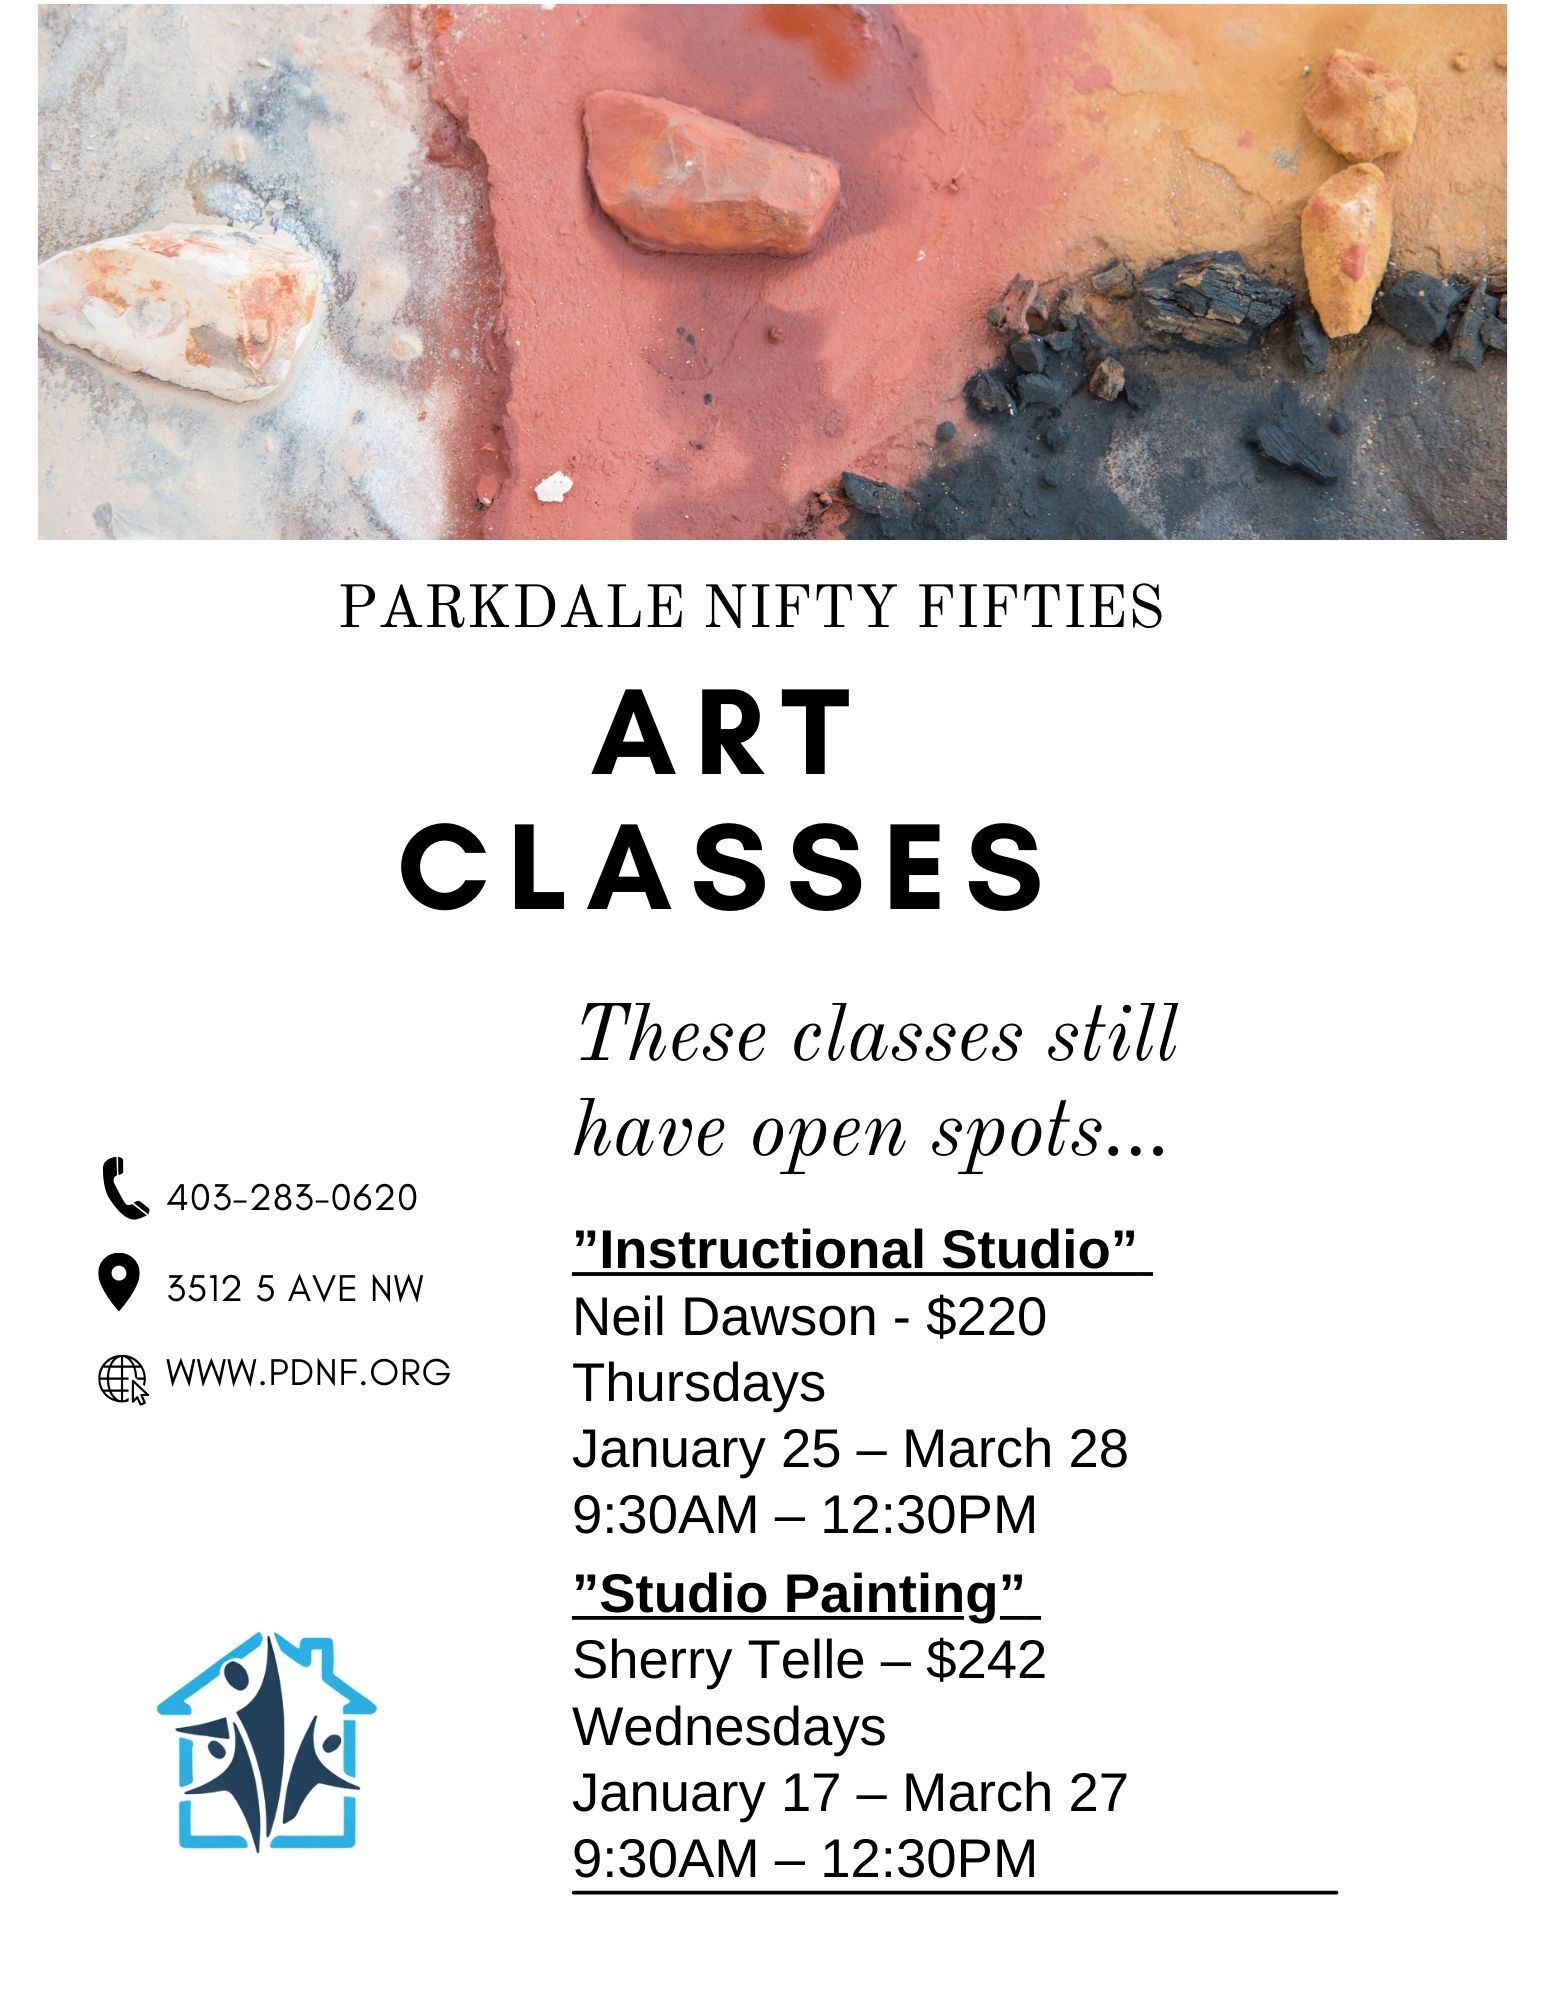 403-283-0620 3512 5 AVE NW WWW.PDNF.ORG PARKDALE NIFTY FIFTIES ART CLASSES These classes still have open spots ... "Instructional Studio" Neil Dawson - $220 Thursdays January 25 - March 28 9:30AM - 12:30PM "Studio Painting" Sherry Telle - $242 Wednesdays January 17 - March 27 9:30AM - 12:30PM